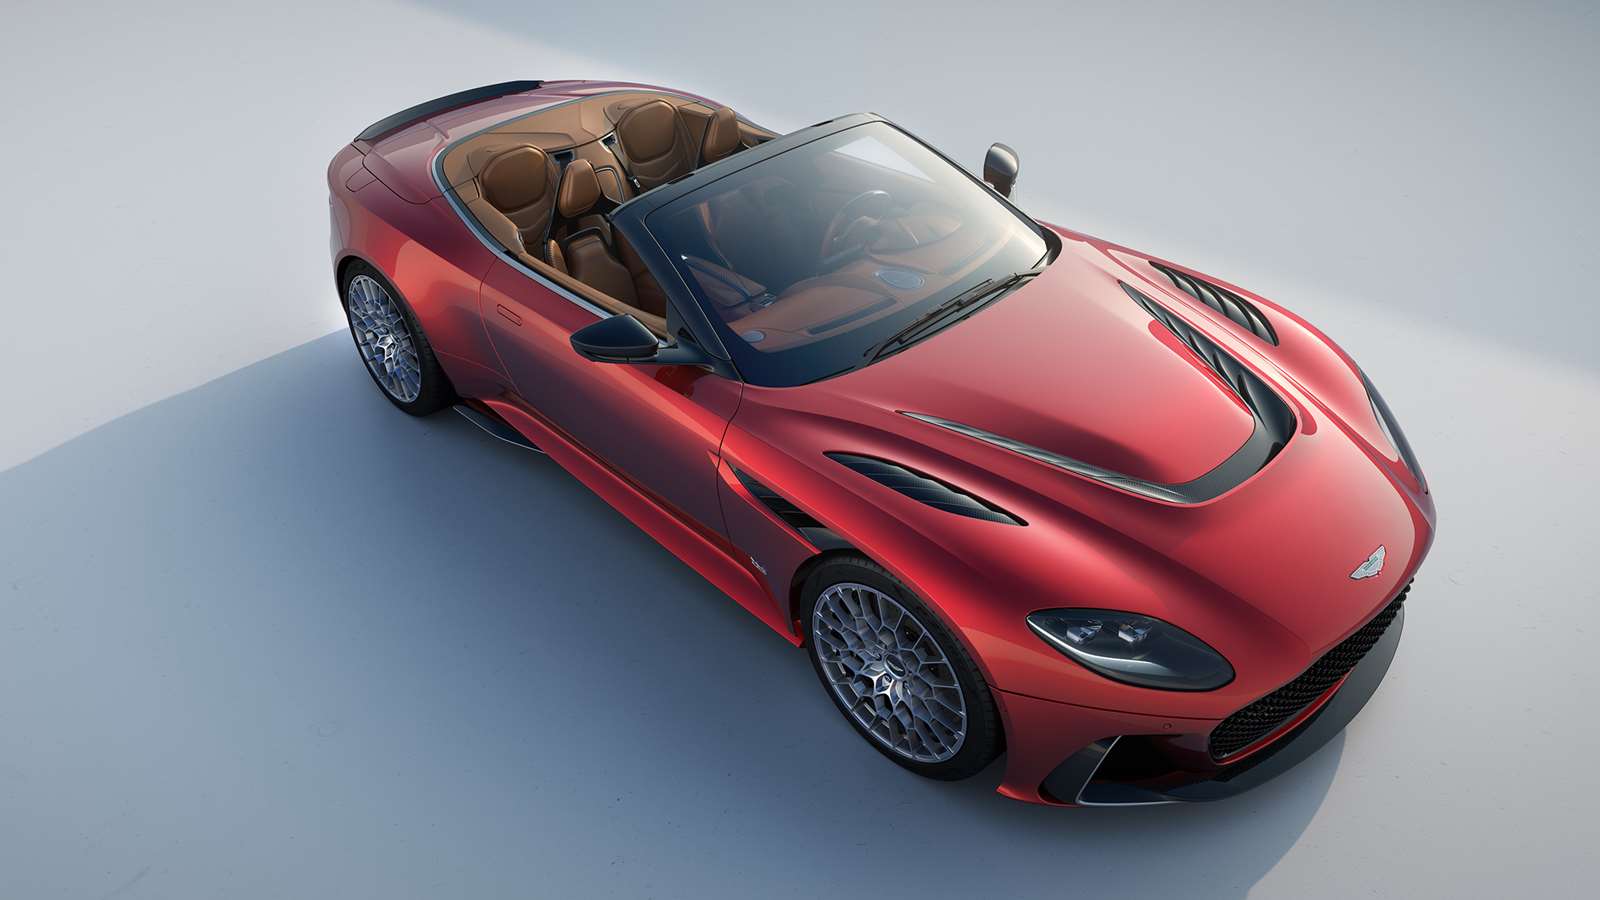 The Aston Martin DBS 770 Ultimate Volante is the ultimate open-top GT